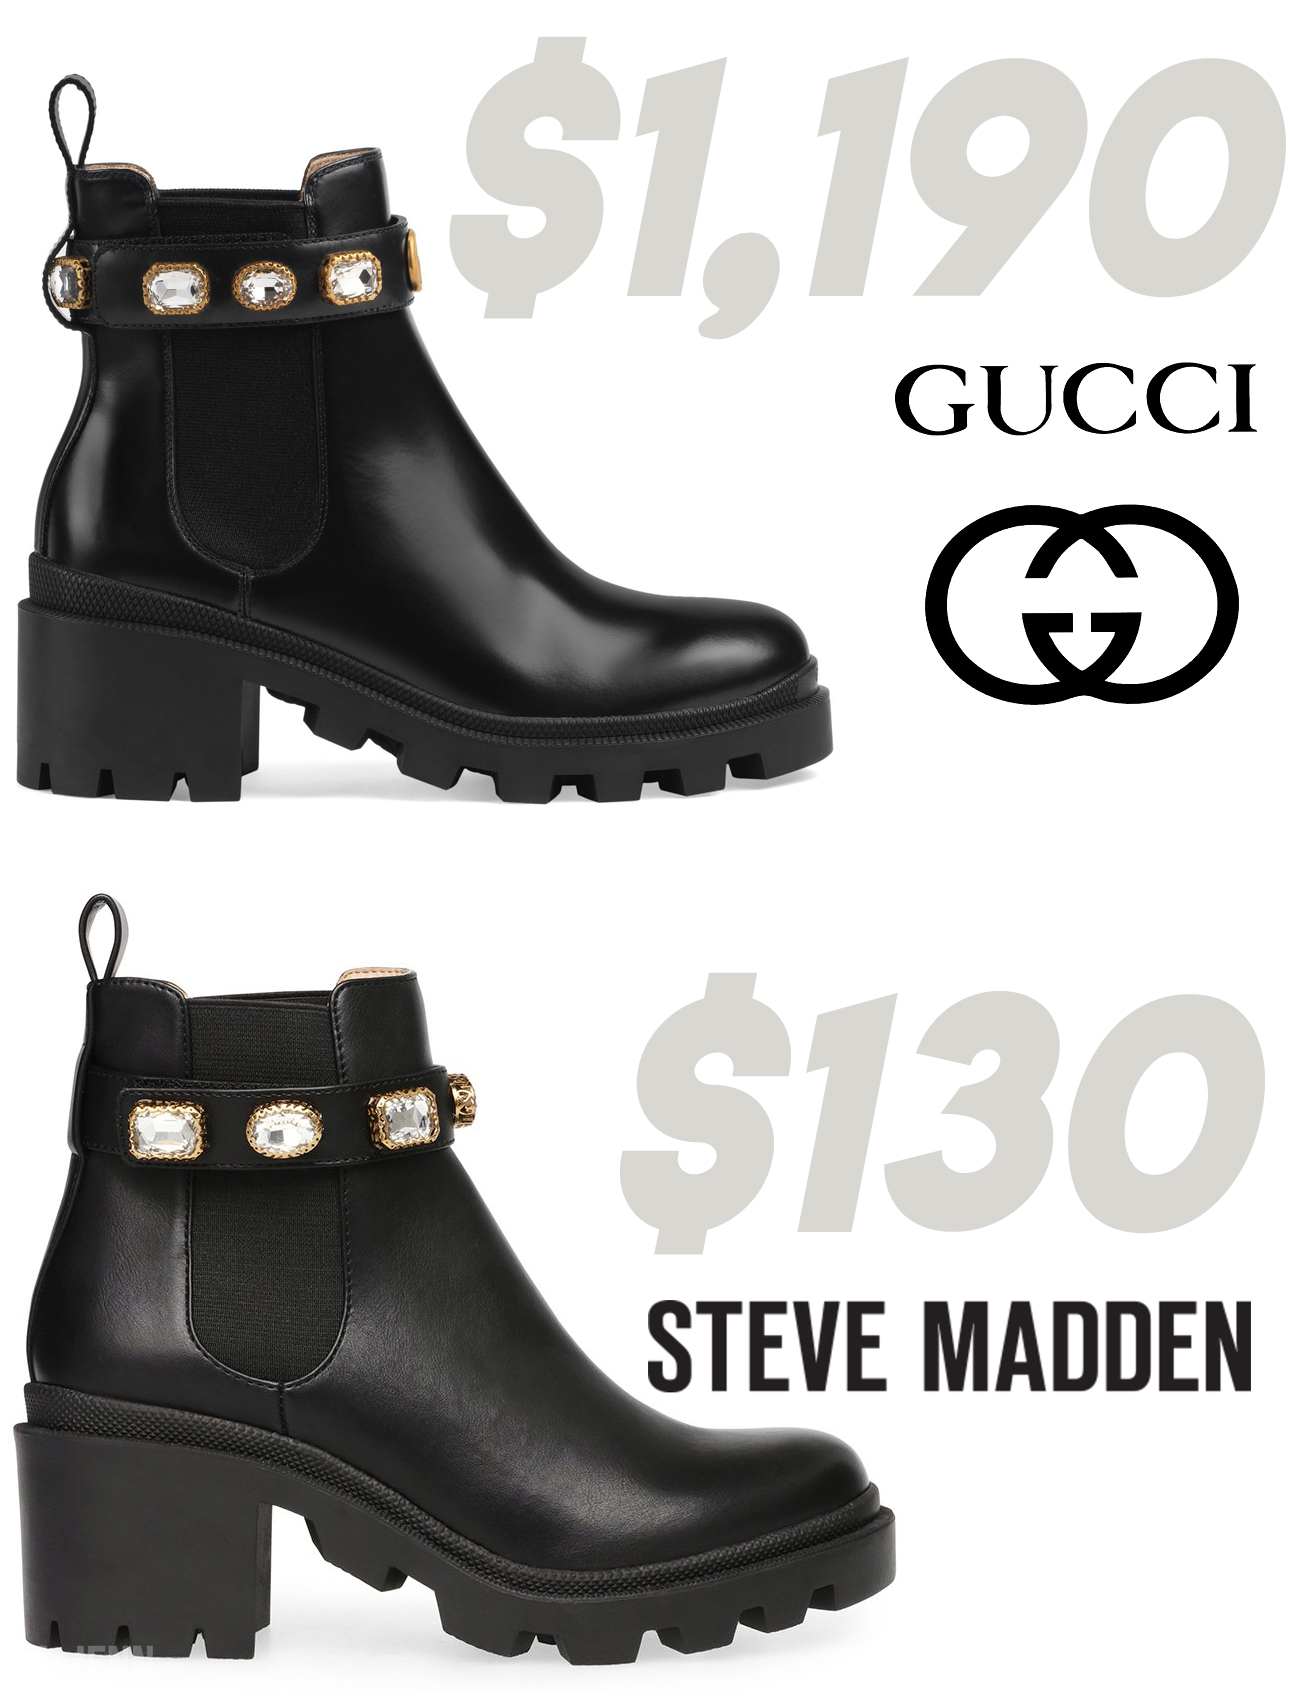 Steve Madden Gucci Boots Dupe: All the Bang, Way Less Buck